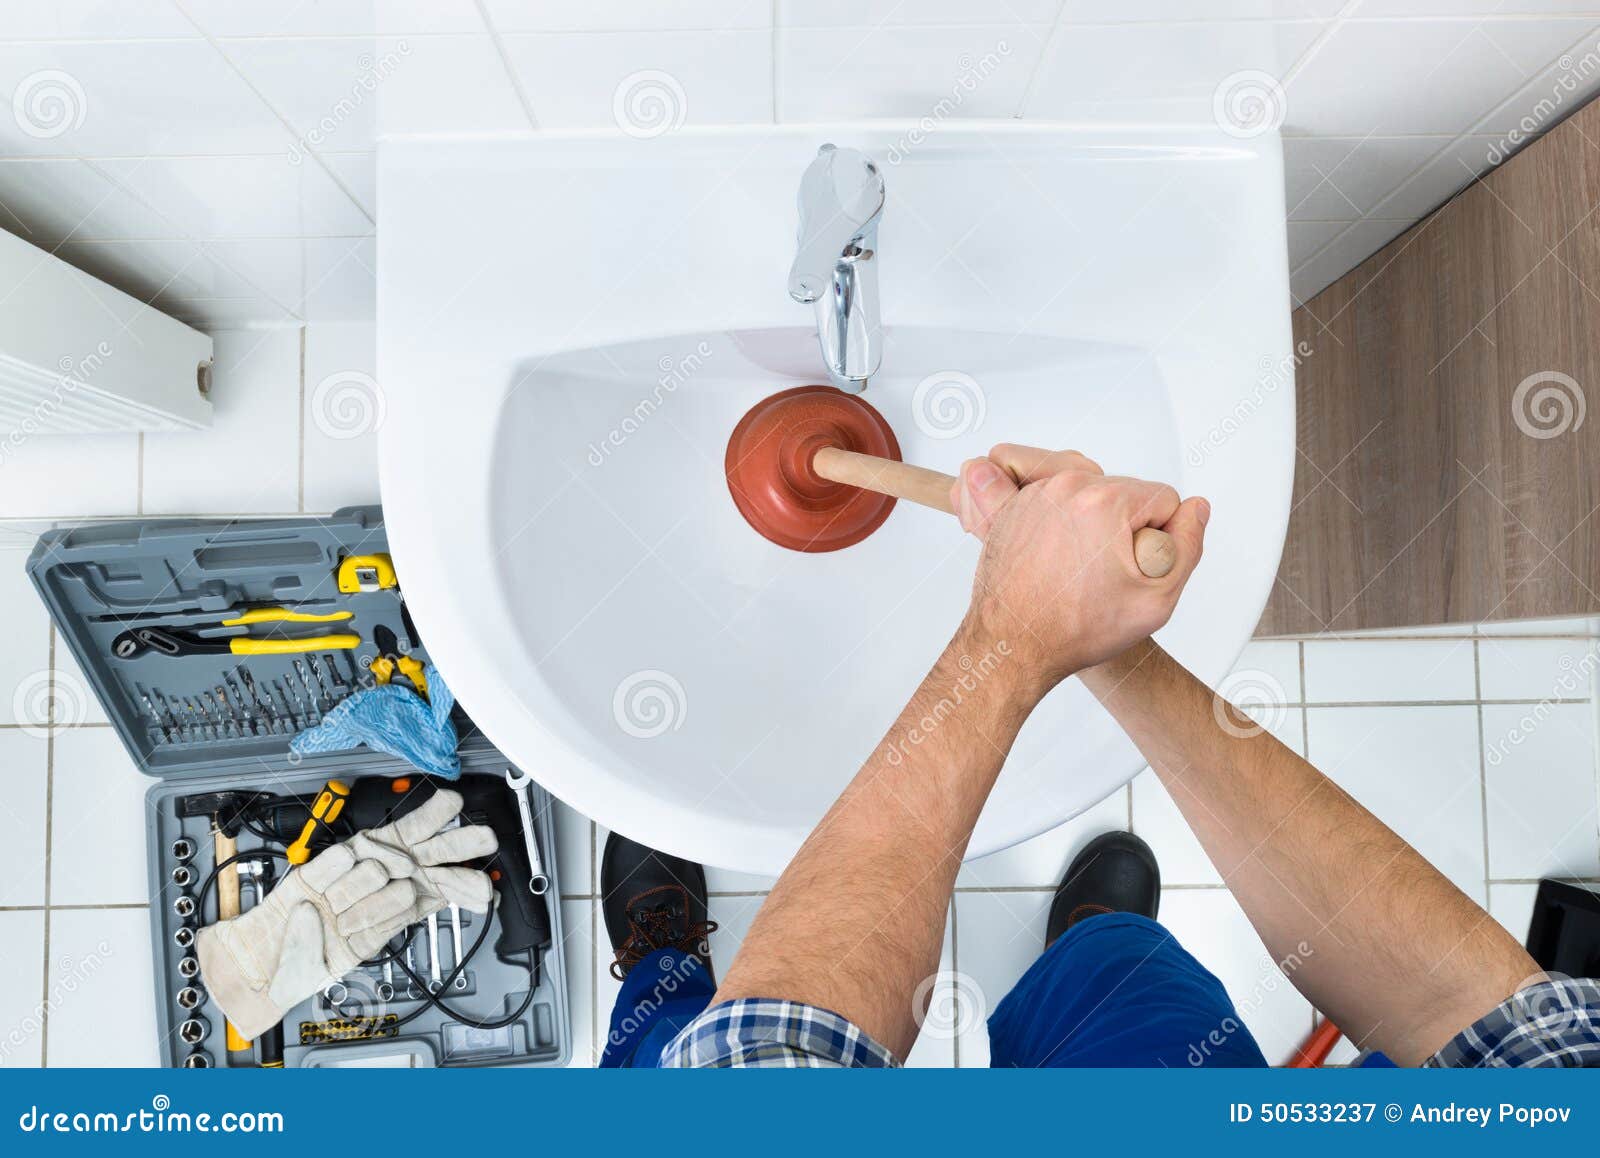 Woman Cleaning Bathroom Sink Drain Using Plunger. Stock Photo, Picture and  Royalty Free Image. Image 176038405.